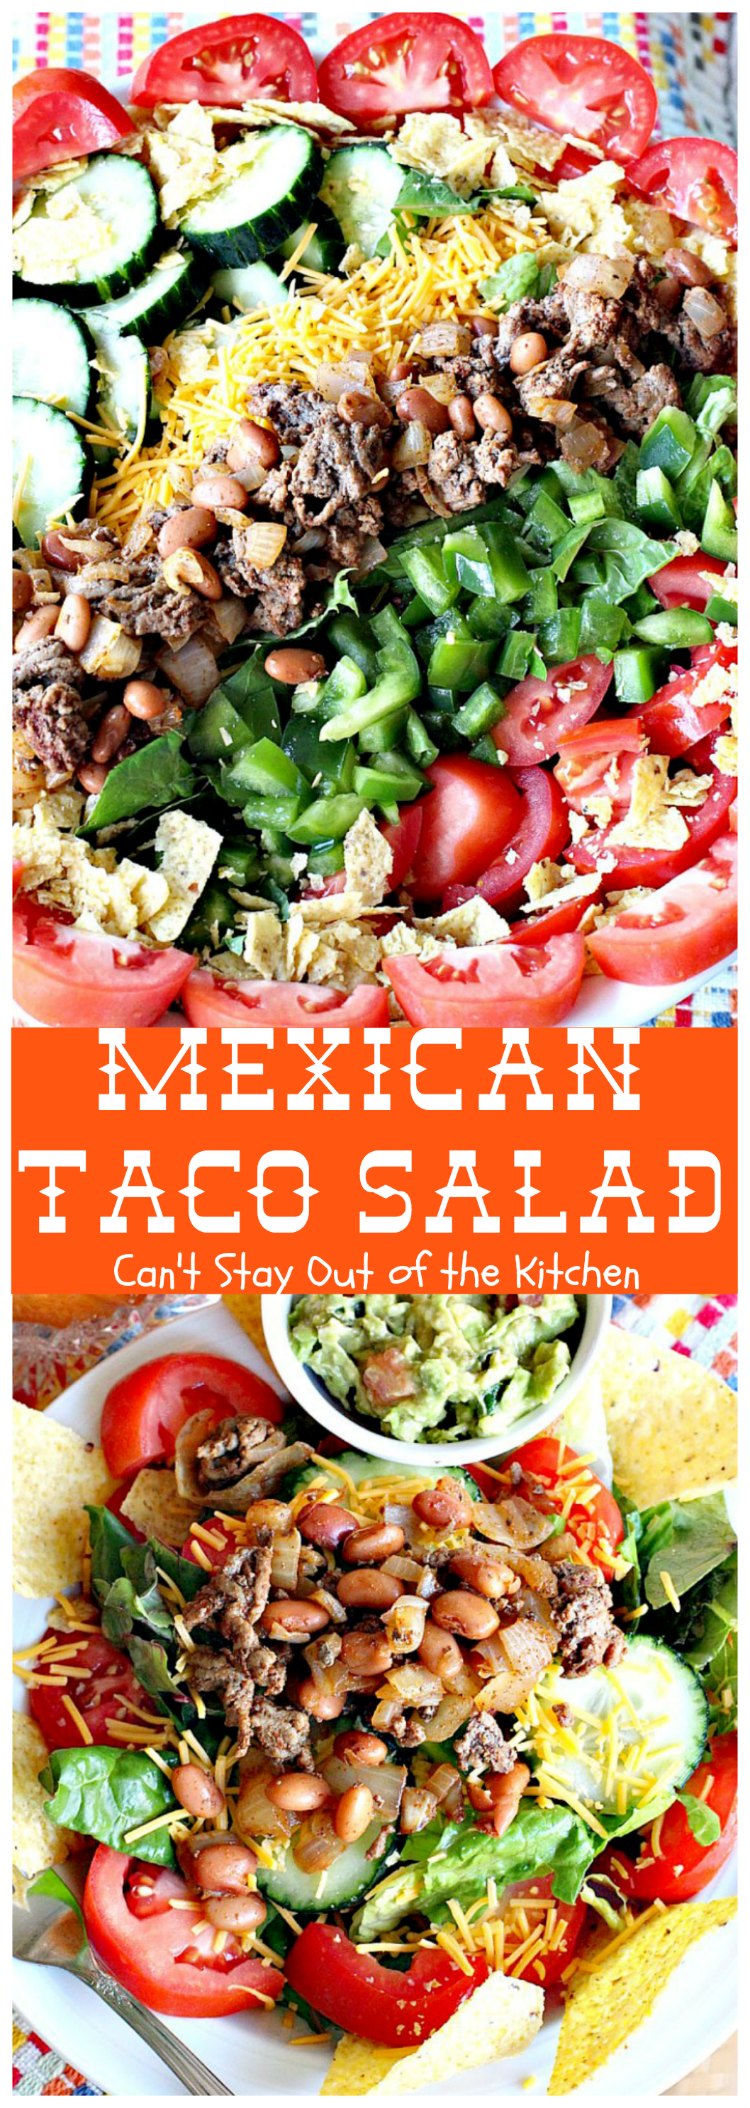 Mexican Taco Salad - Can't Stay Out of the Kitchen